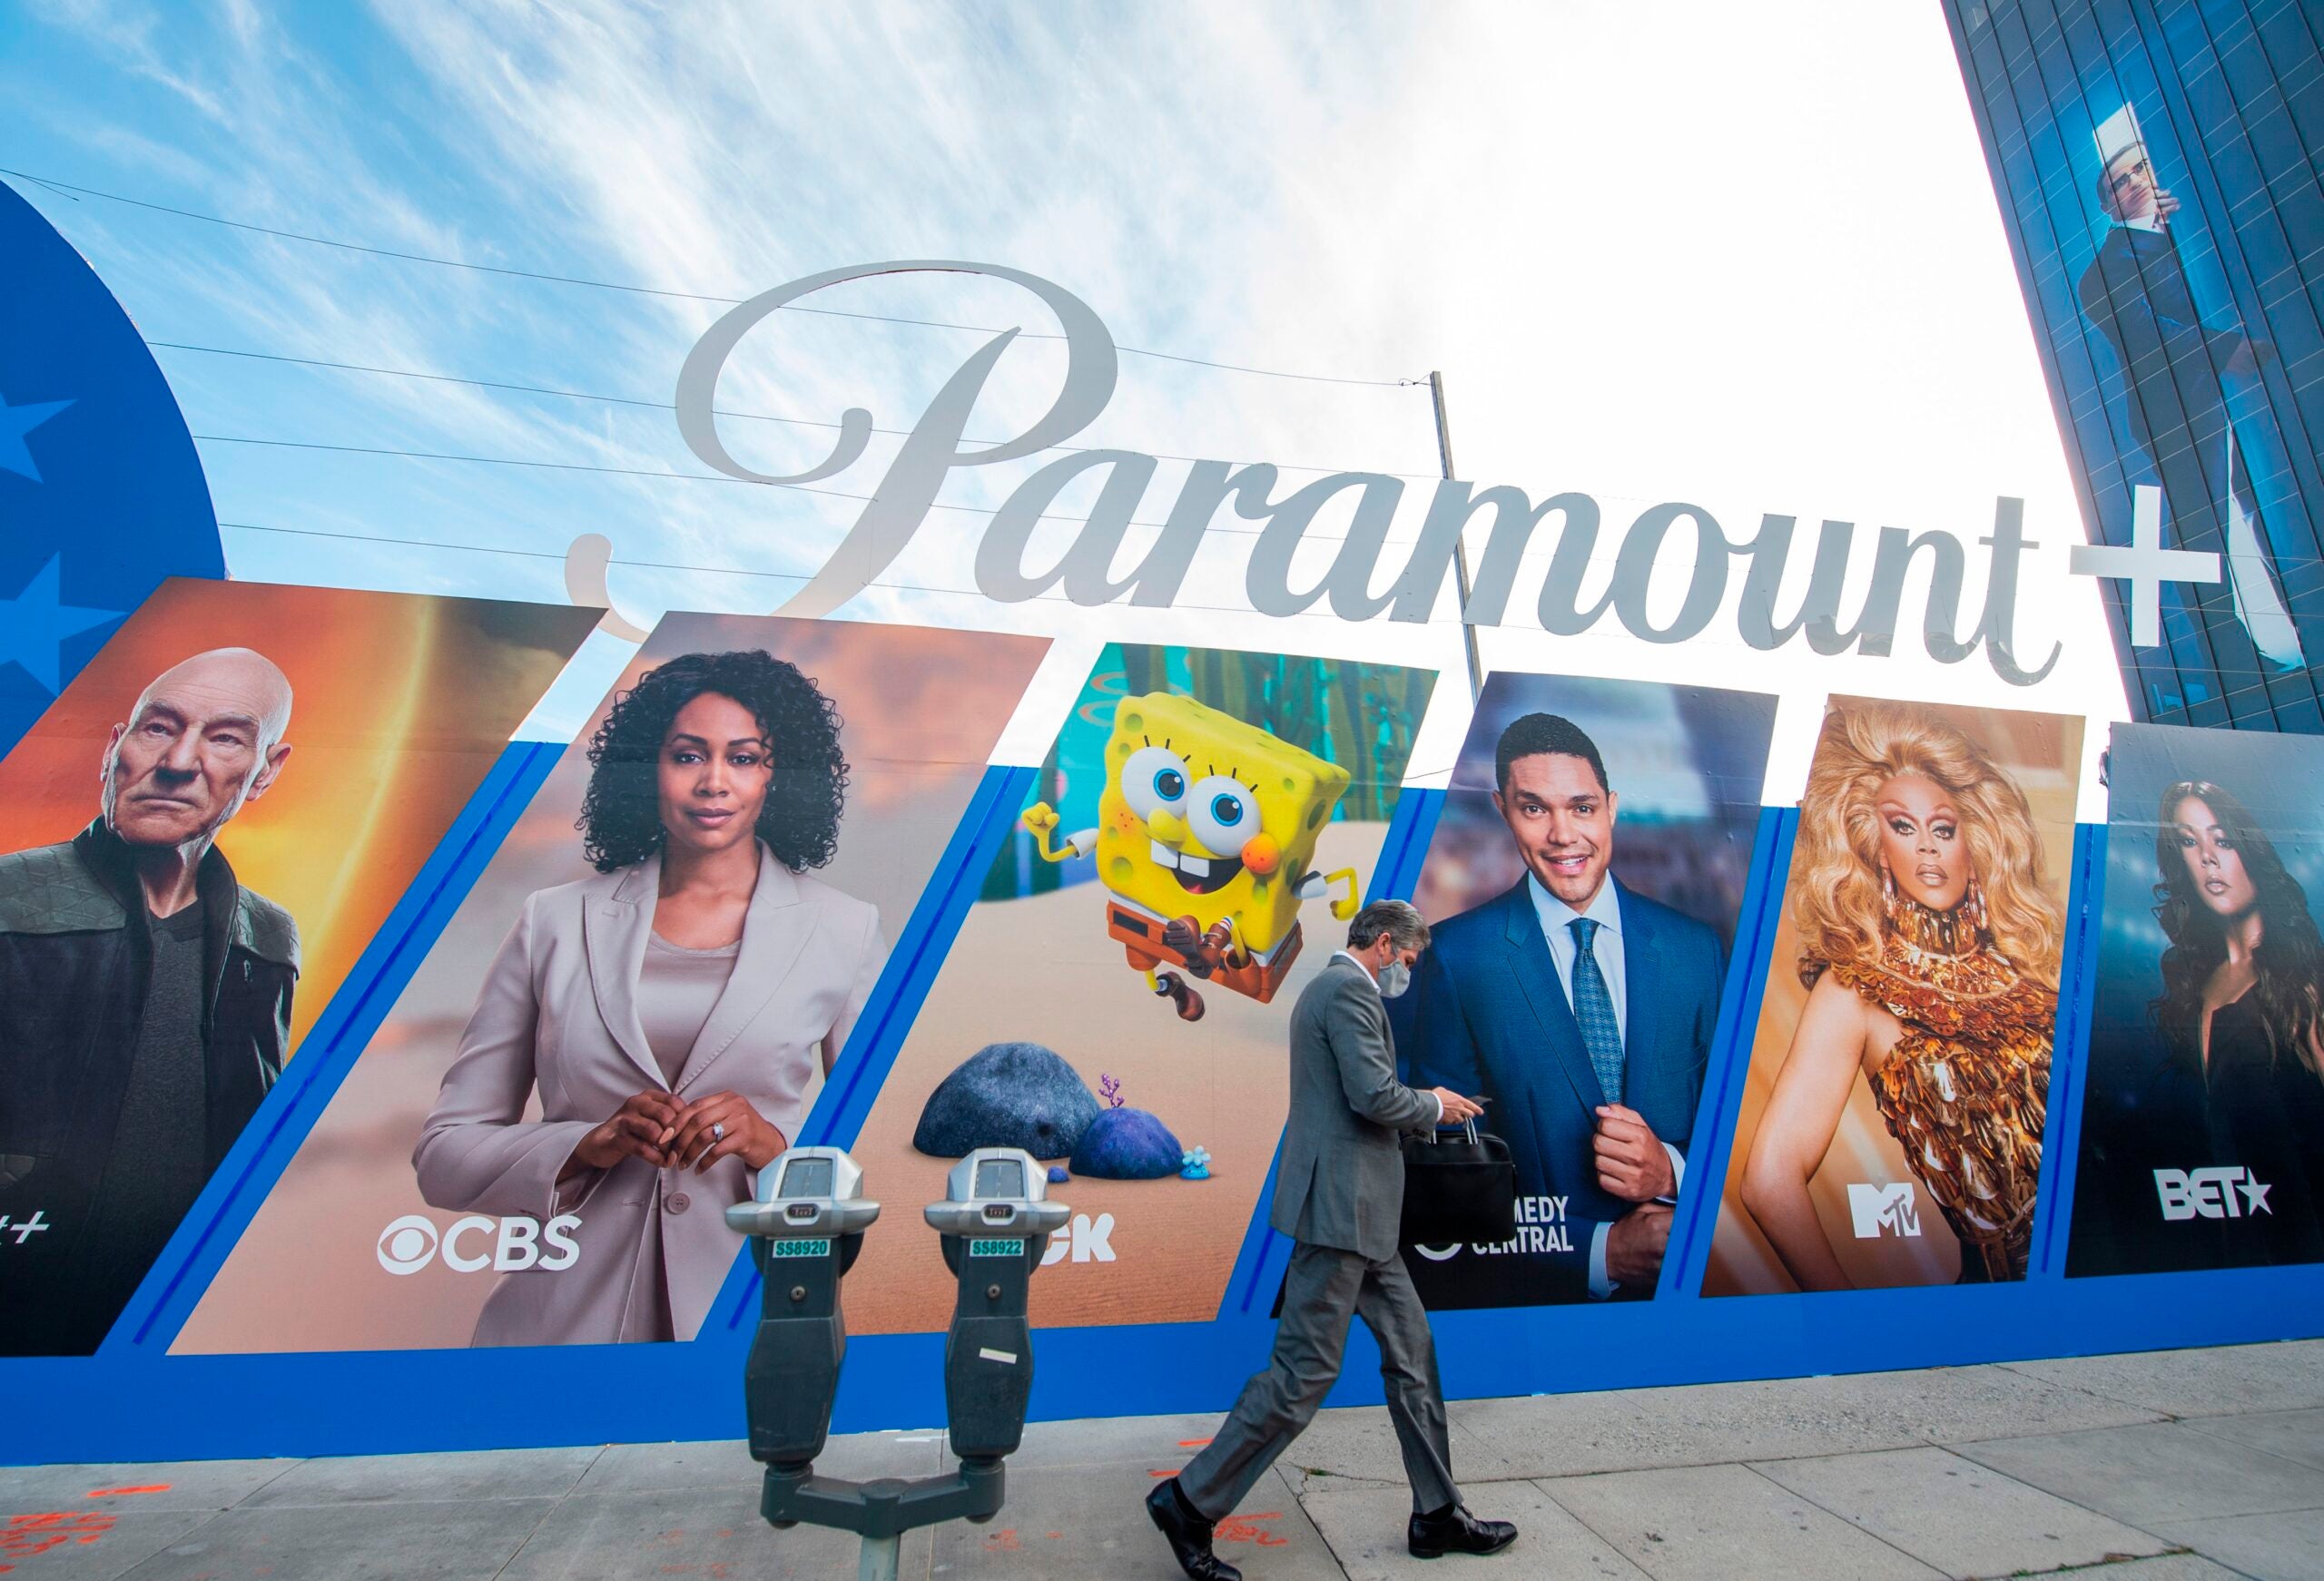 Paramount+: What to know about the latest streaming service